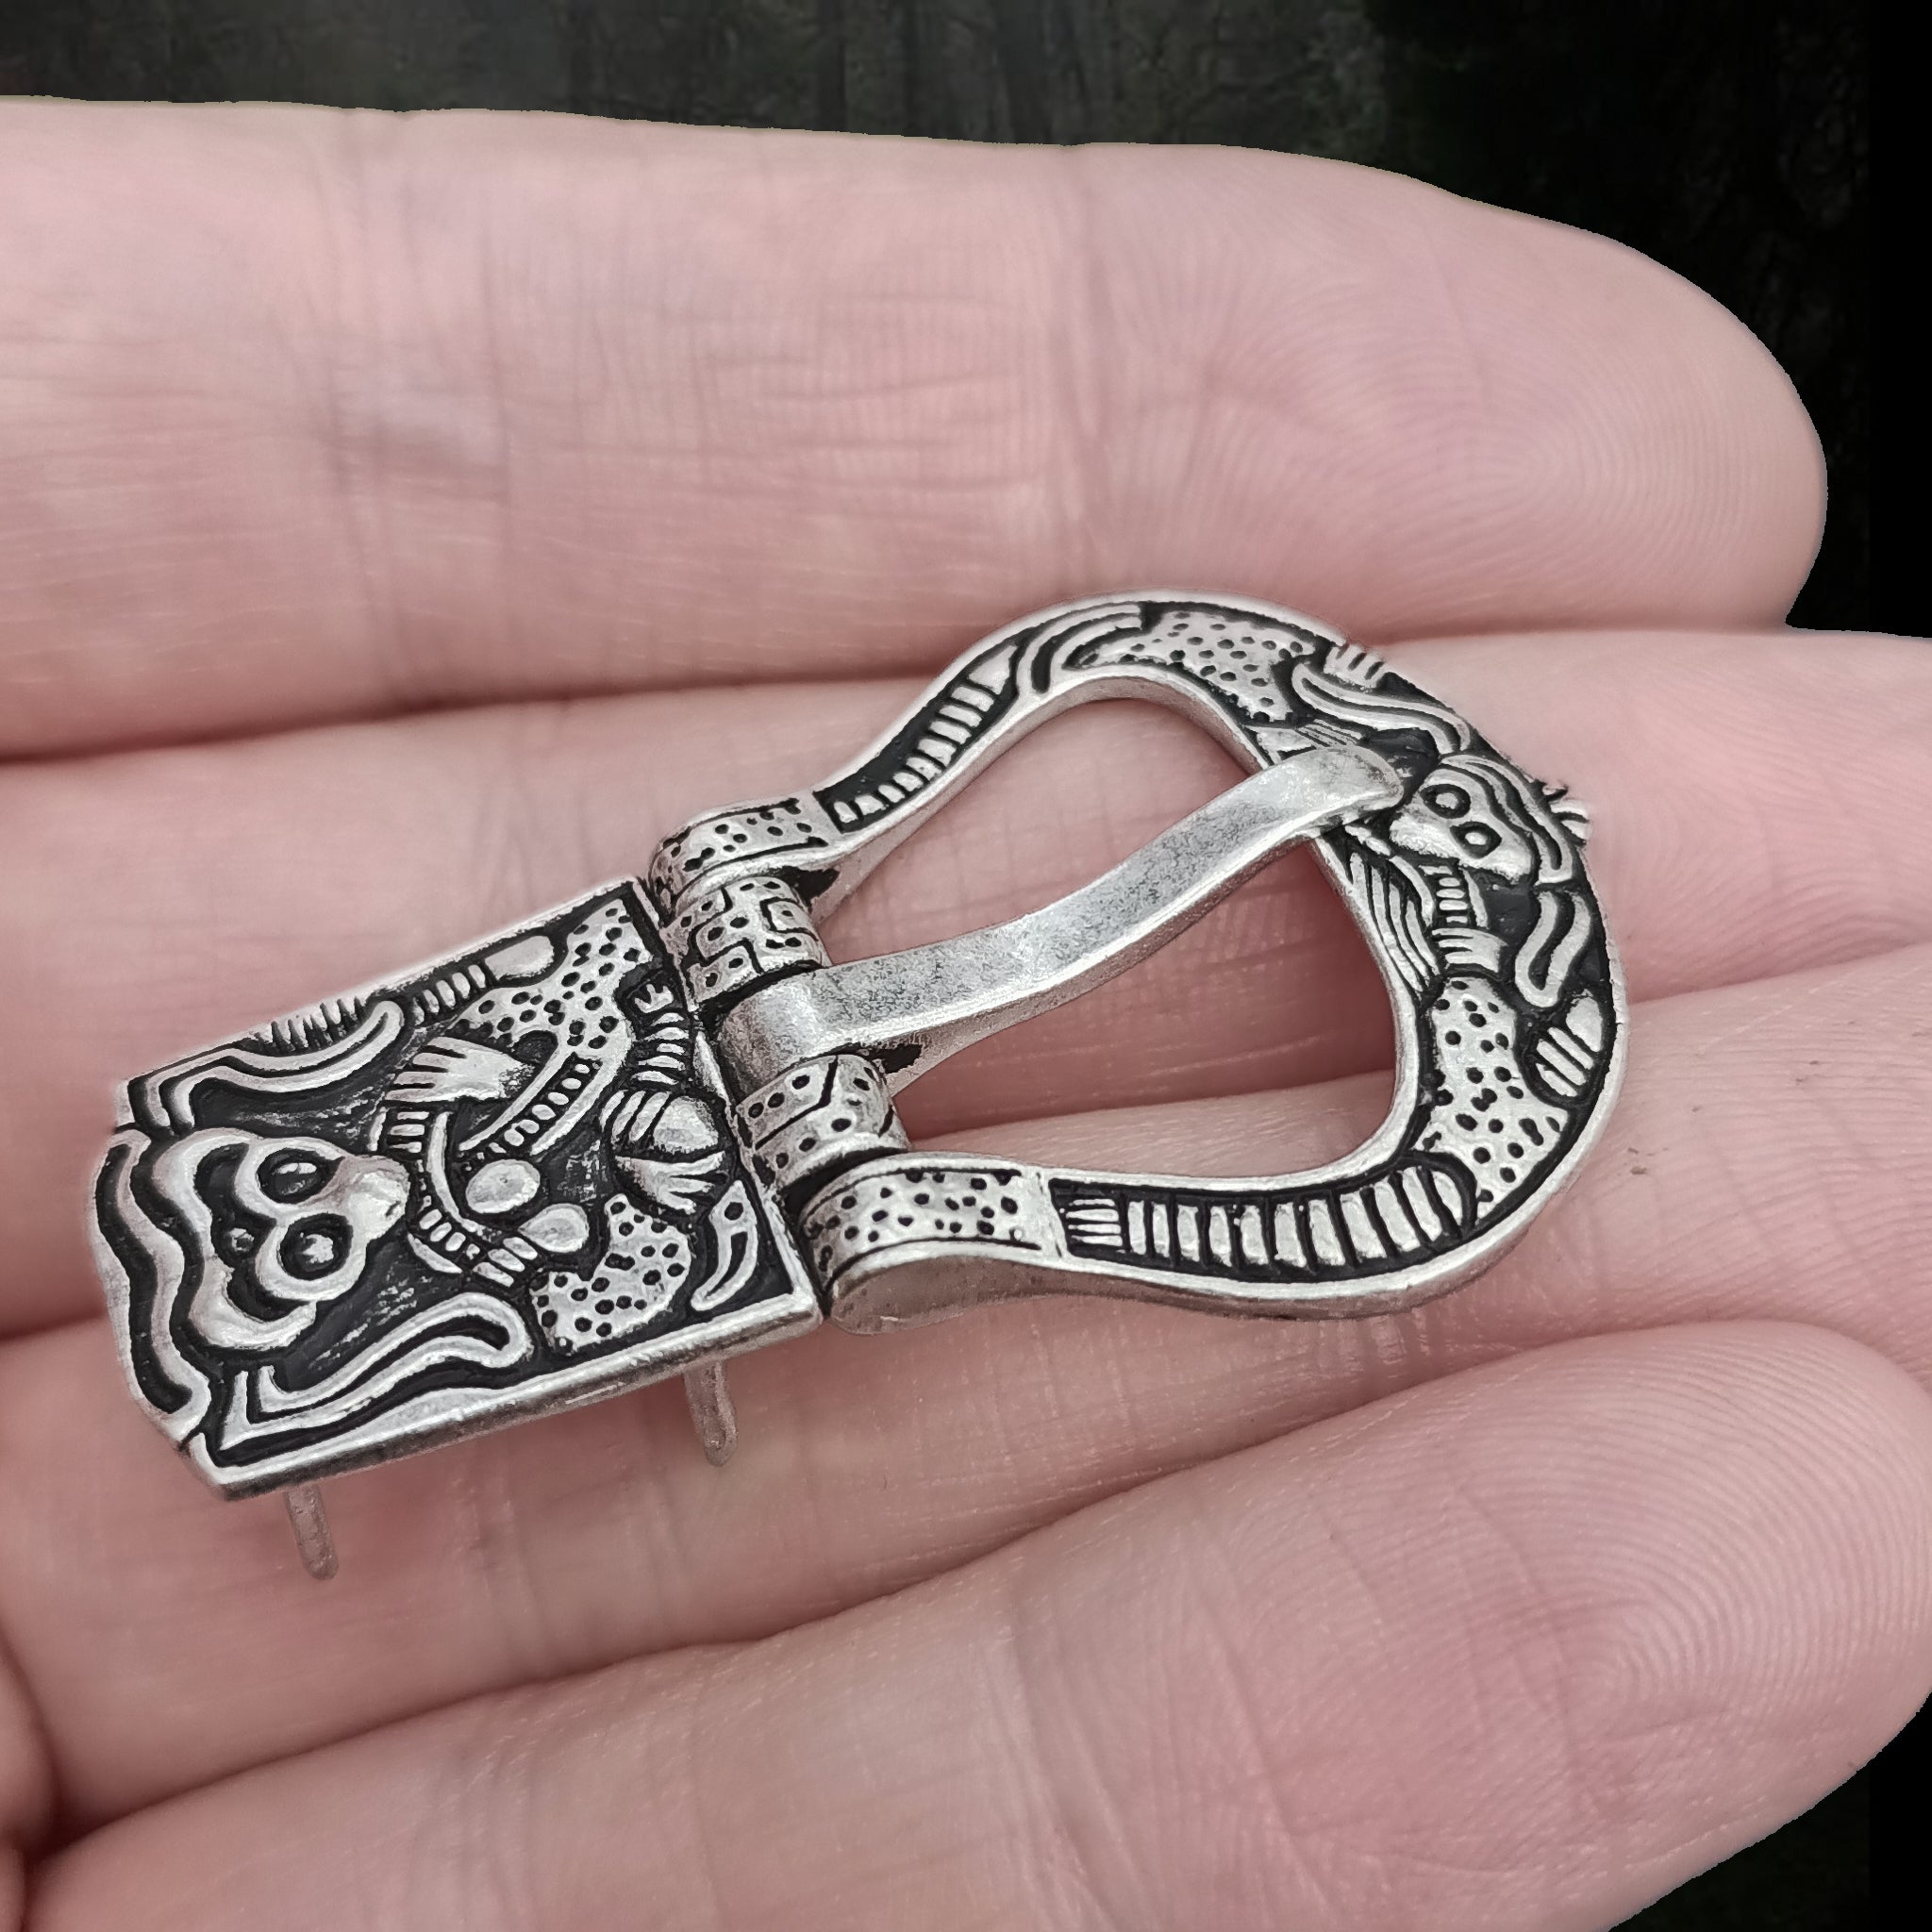 Silver Plated Borre Style Gripping Beast Viking Buckle on Hand - Side Angle View